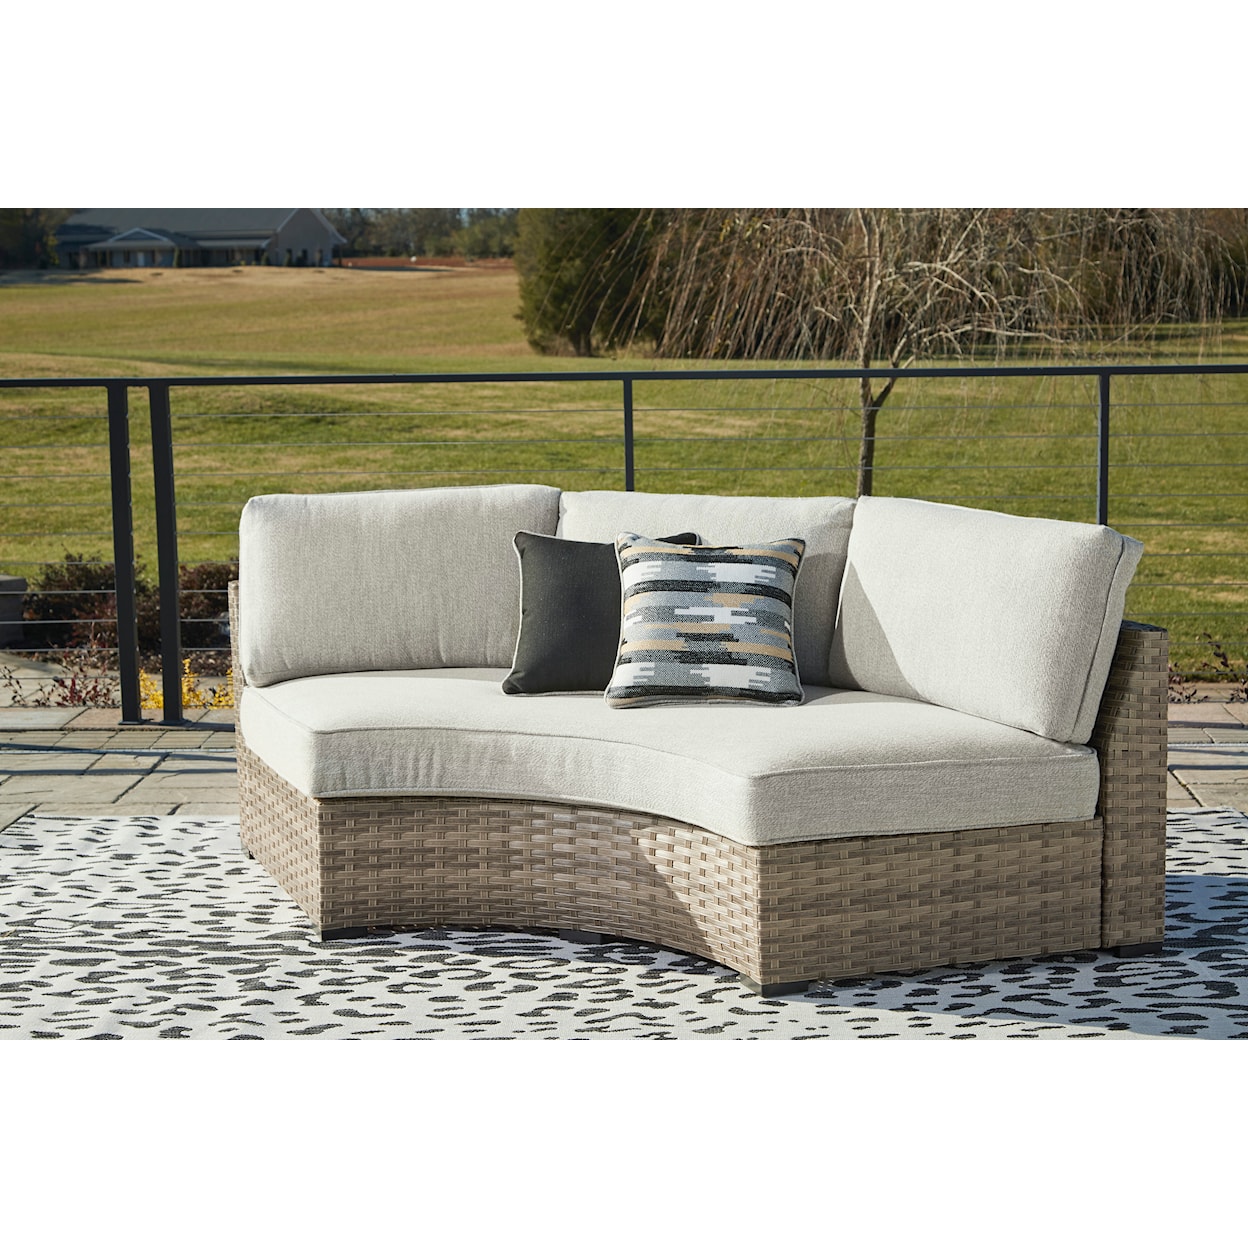 Ashley Signature Design Calworth Outdoor Curved Loveseat with Cushion